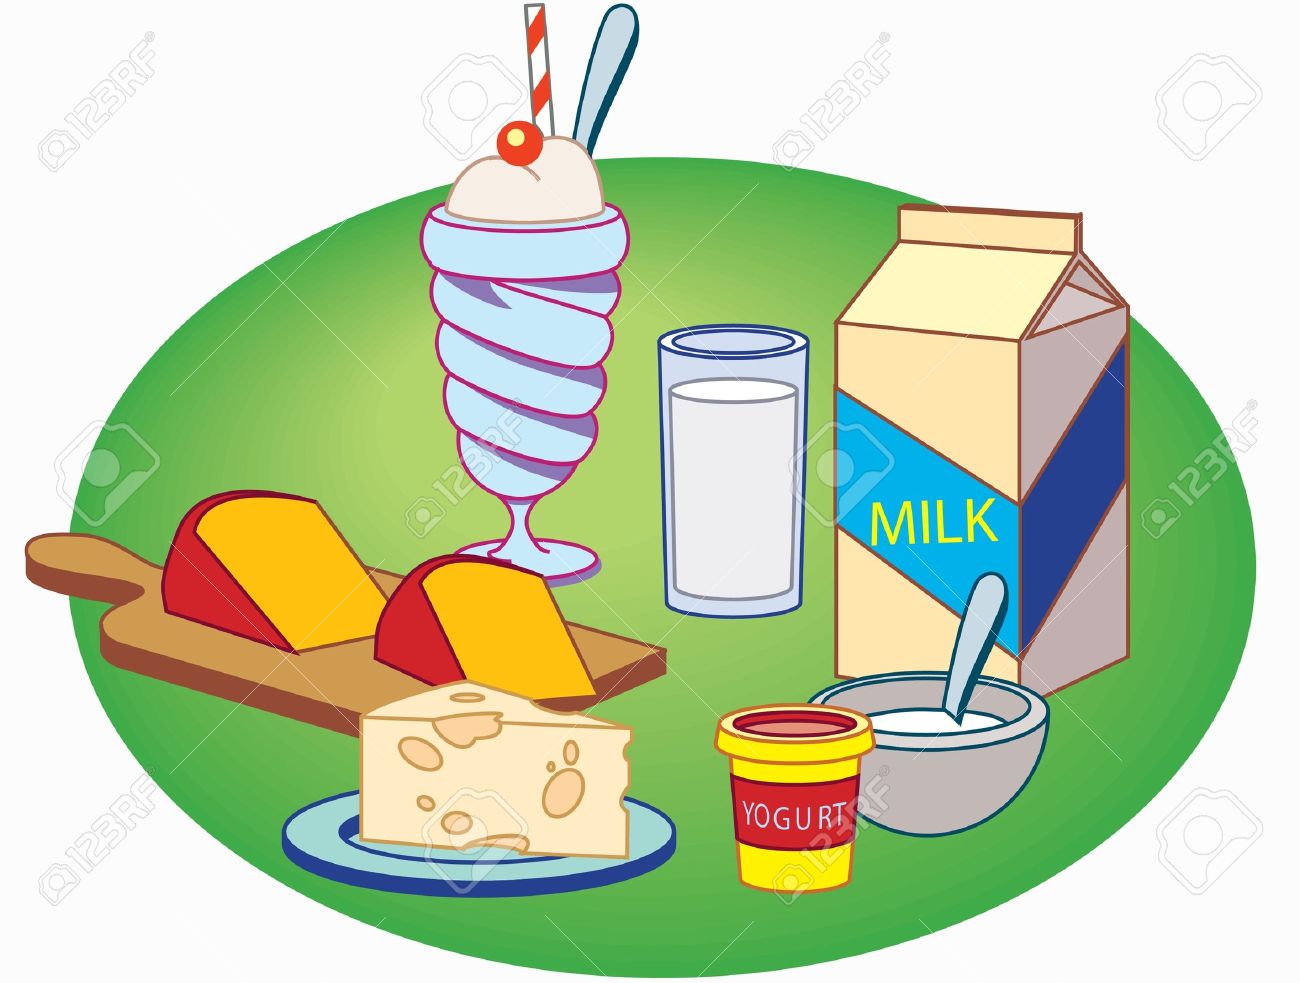 This Is Image A Few Milk Products Royalty Free Cliparts, Vectors.